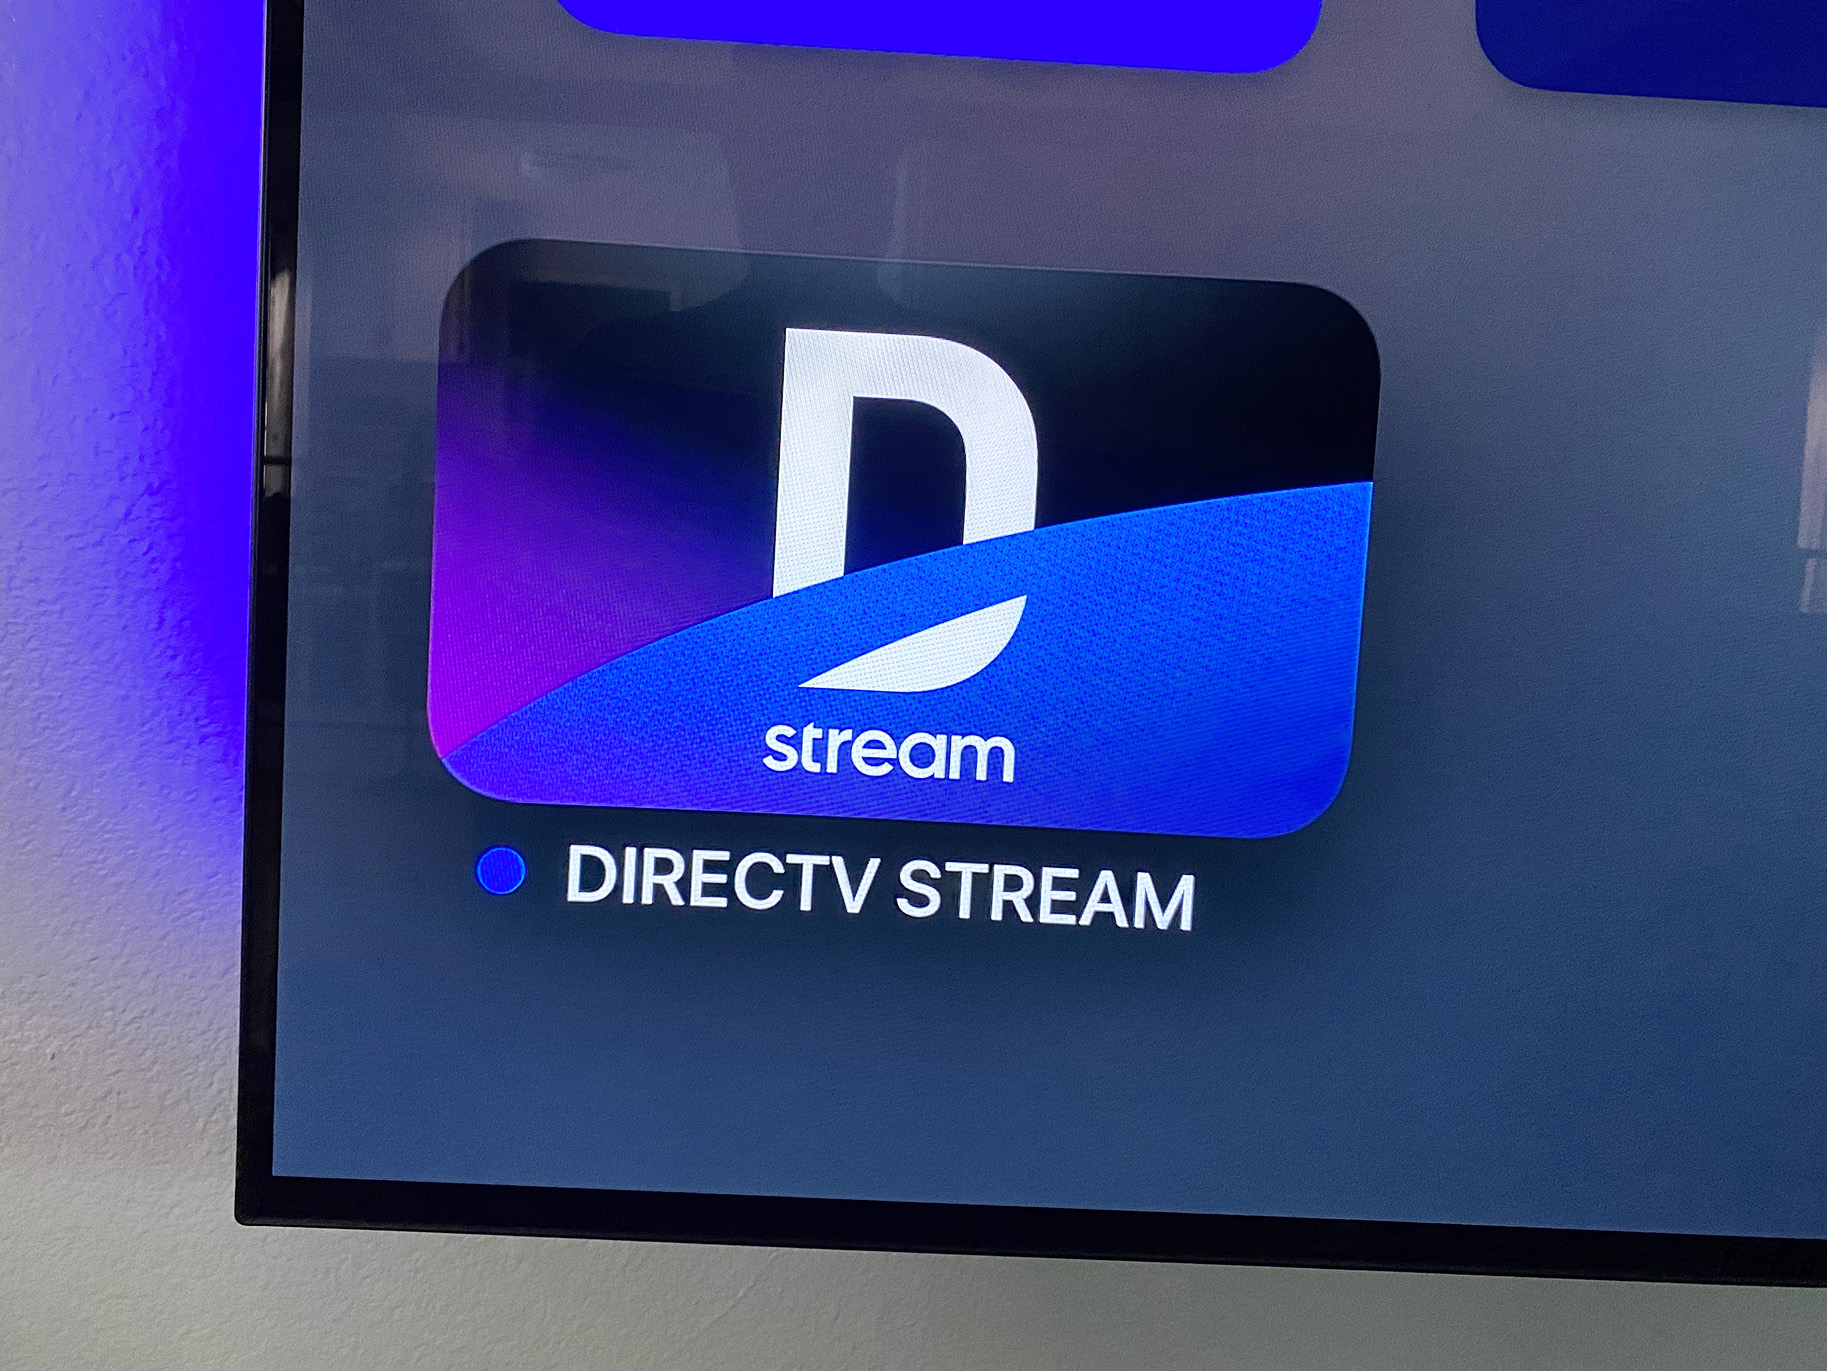 DirecTV Stream will have NFL RedZone, for what it's worth